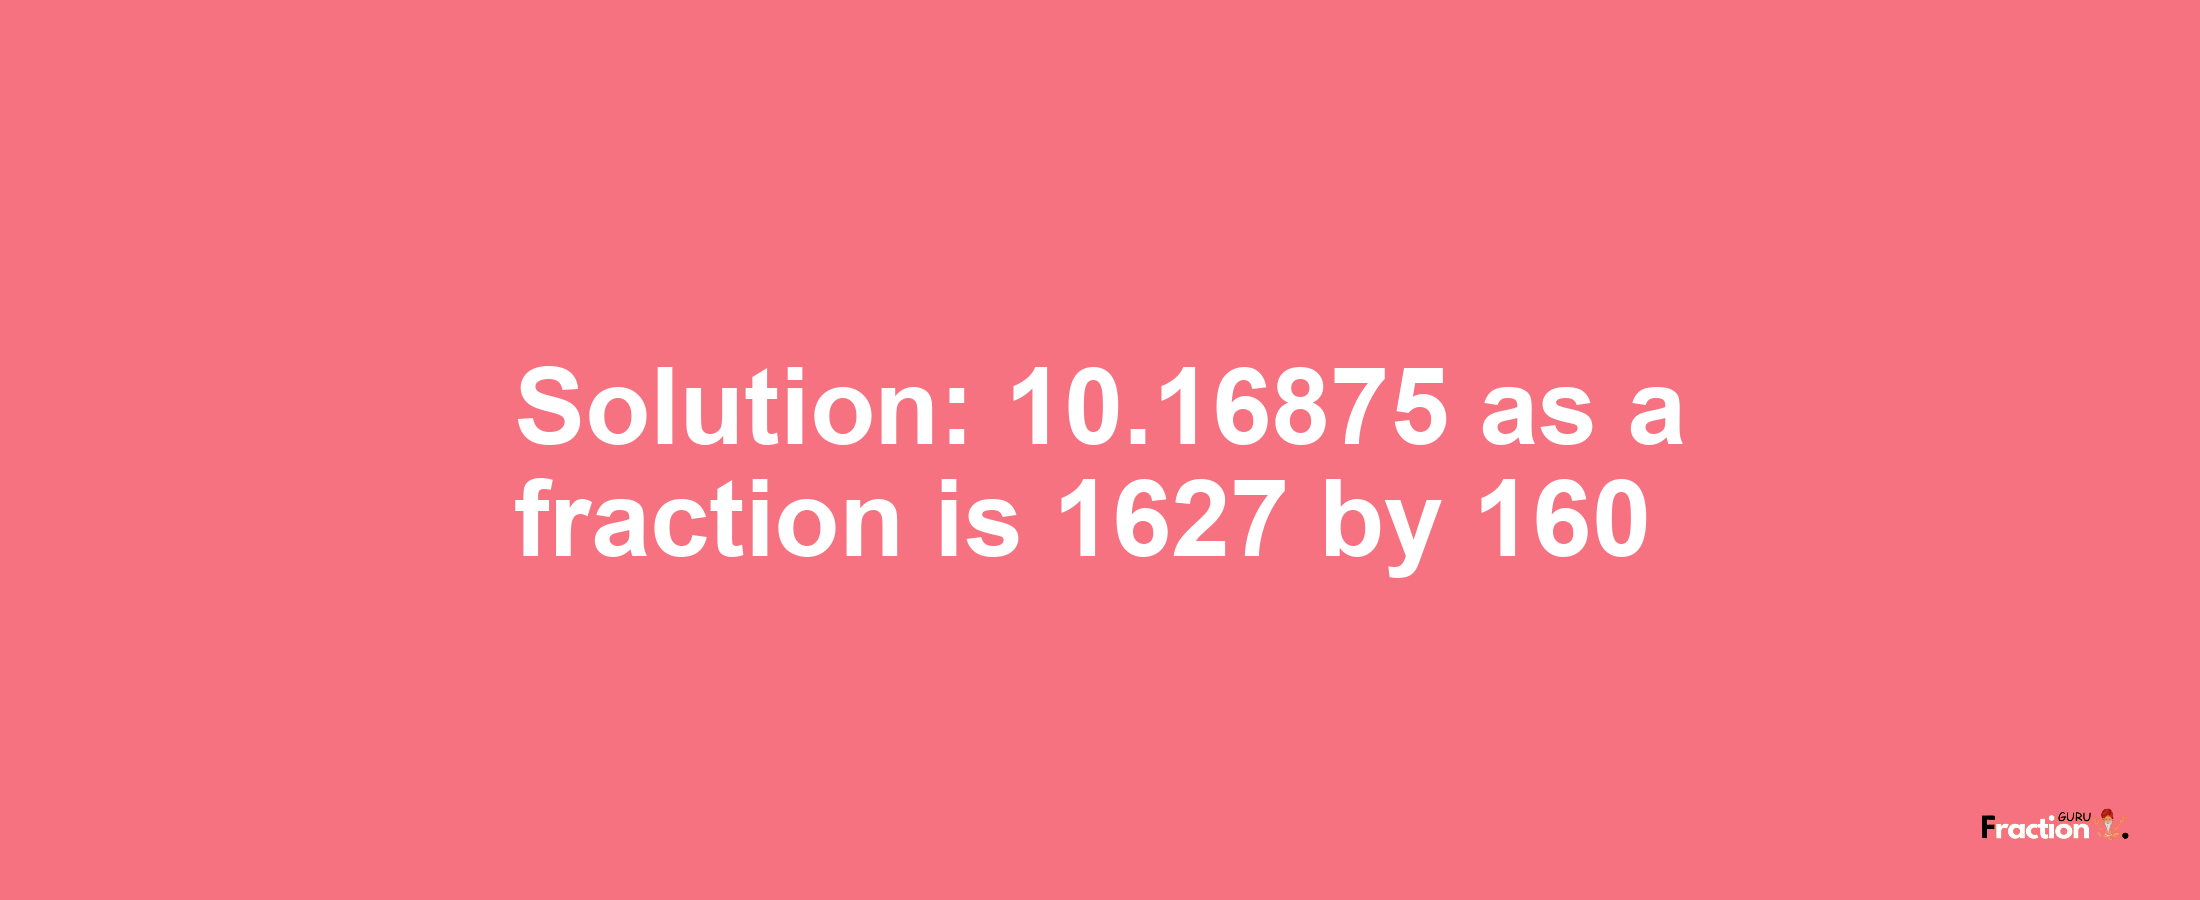 Solution:10.16875 as a fraction is 1627/160